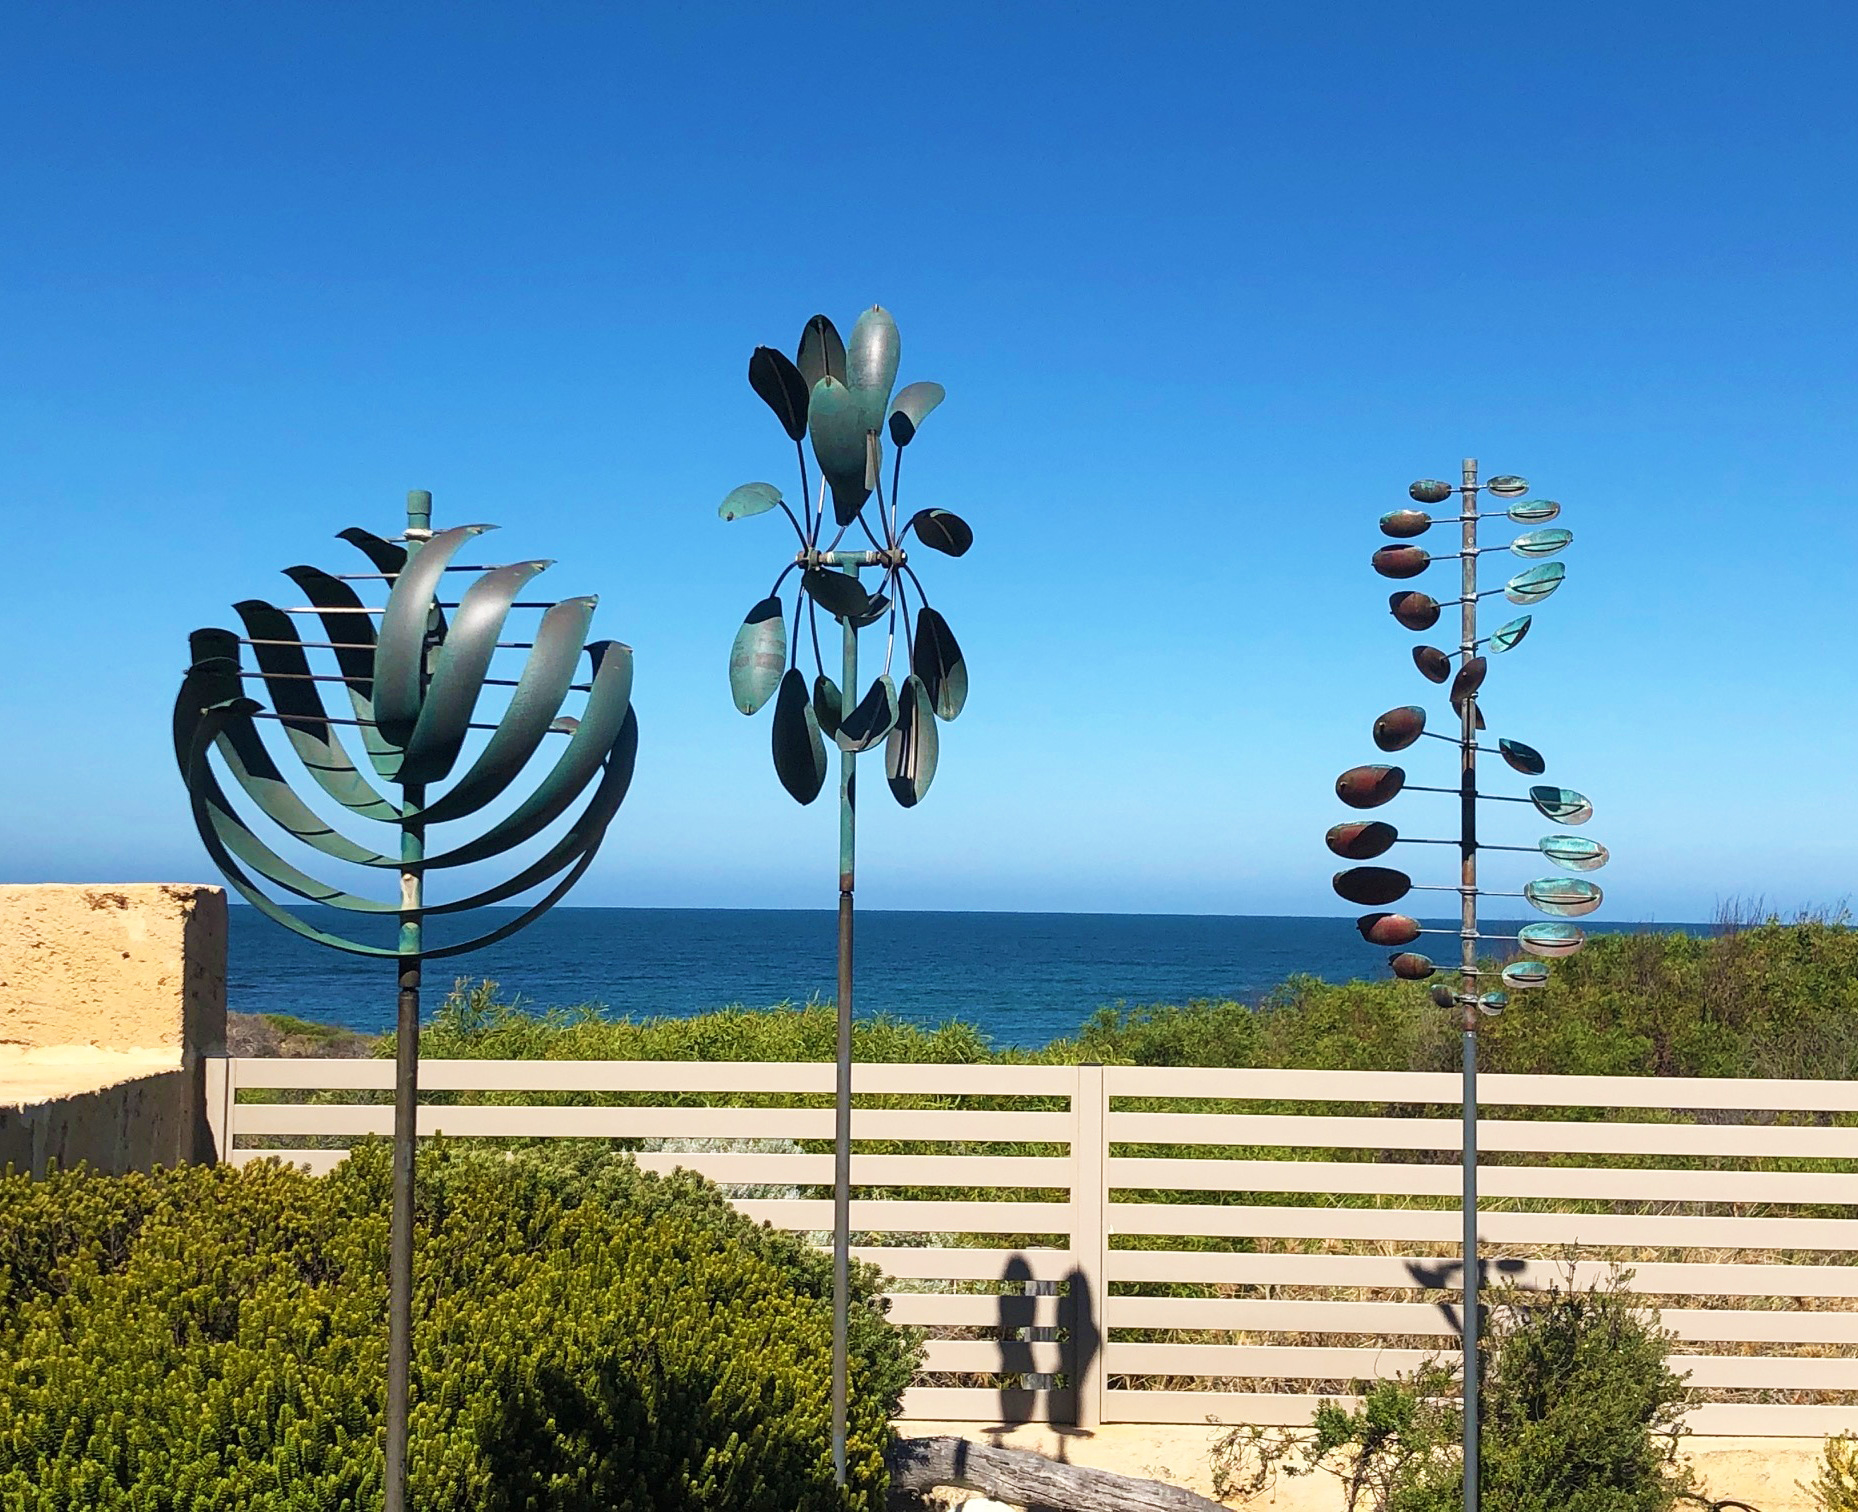 Whitaker Wind Sculptures Collected Across the Globe